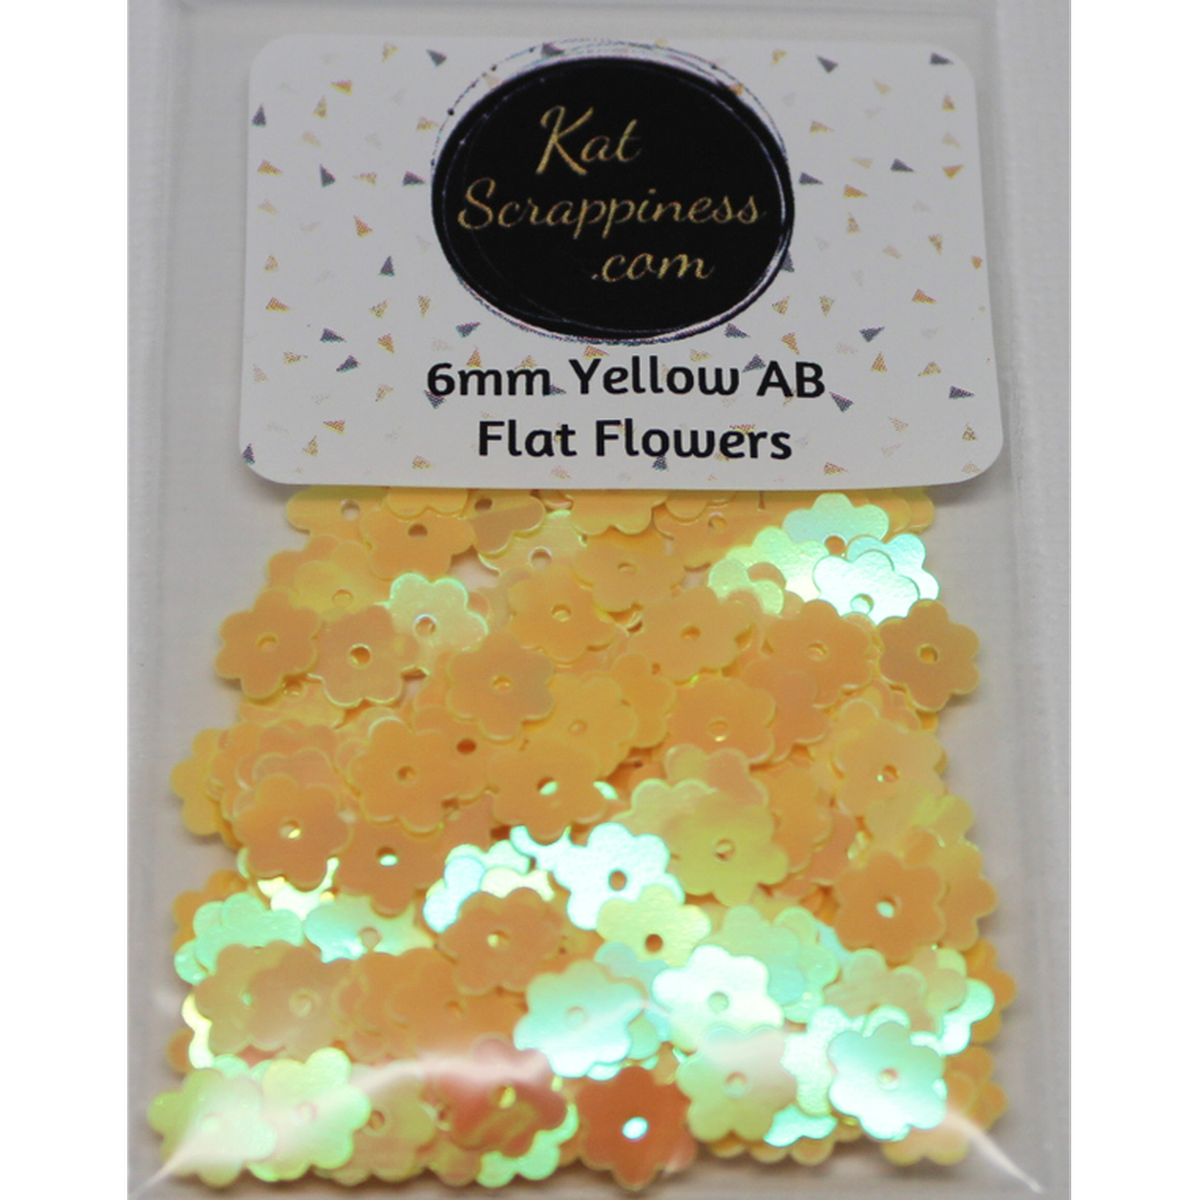 6mm Yellow AB Flat Flower Sequins Shaker Card Fillers - Kat Scrappiness